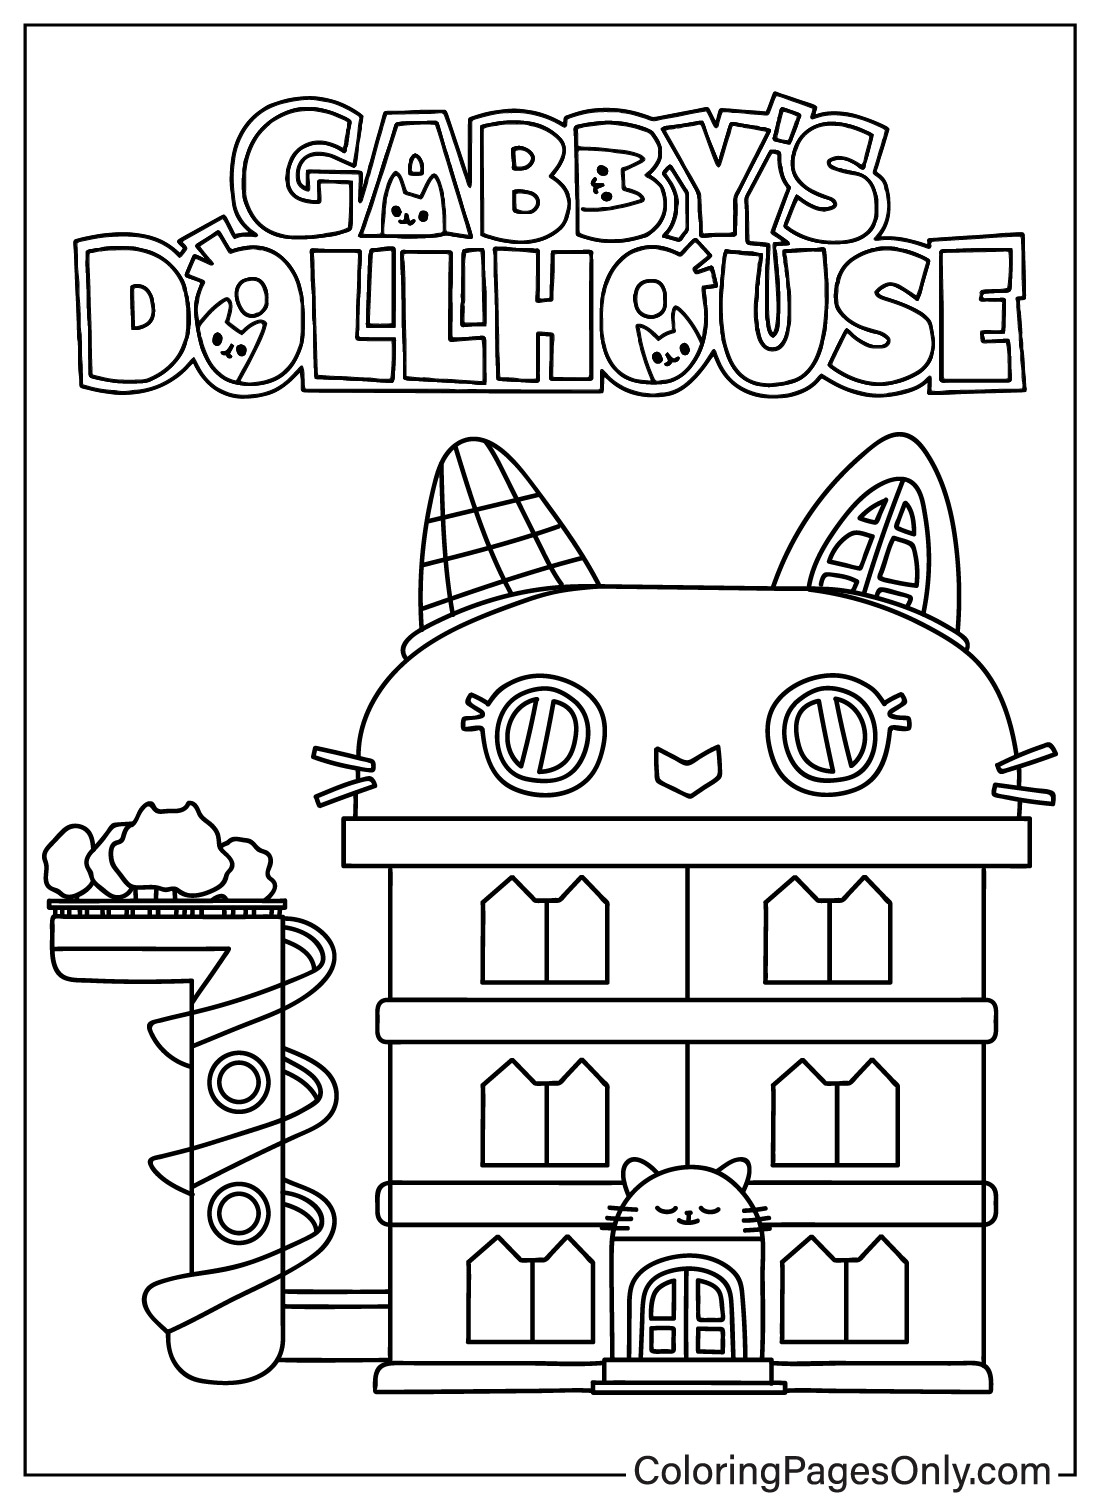 Coloring pages only on x ð wele to the collection of gabbys dollhouse coloring pages ð httpstcovlzjbsxzj gabbysdollhouse gabby coloringpagesonly coloringpages coloringbook art fanart sketch drawing draw coloring usa trend